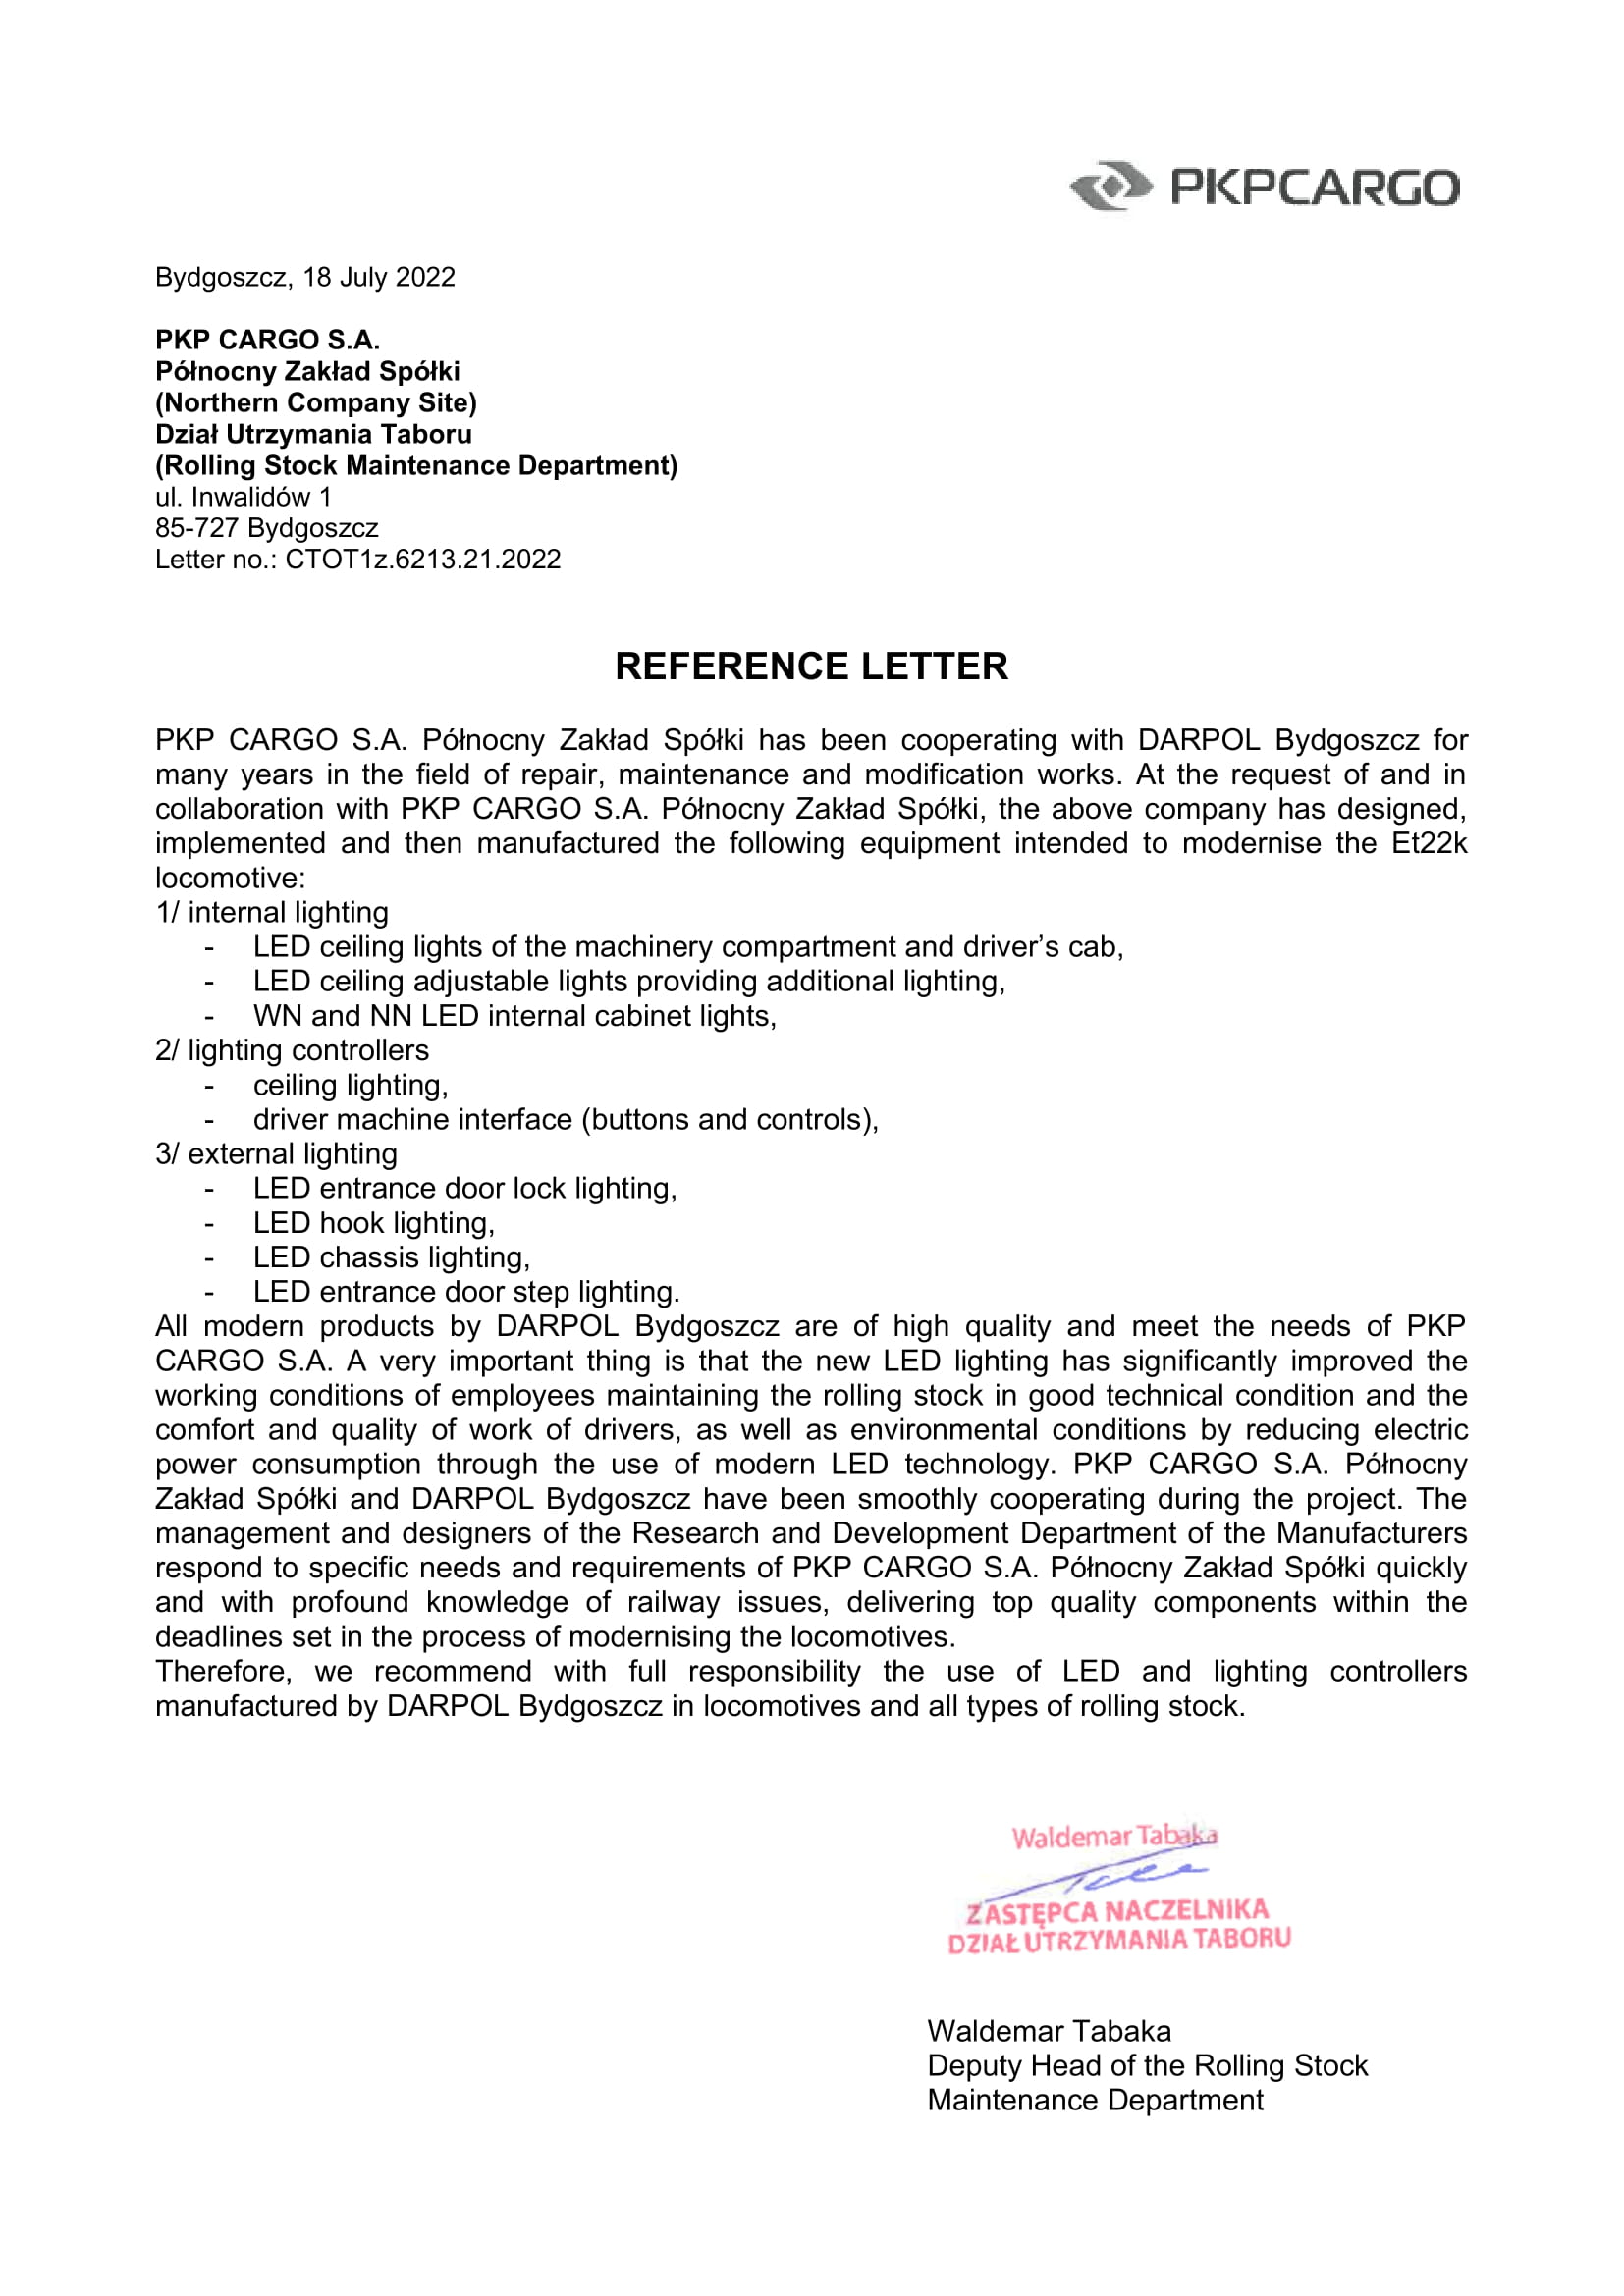 Reference letter from PKP Cargo 